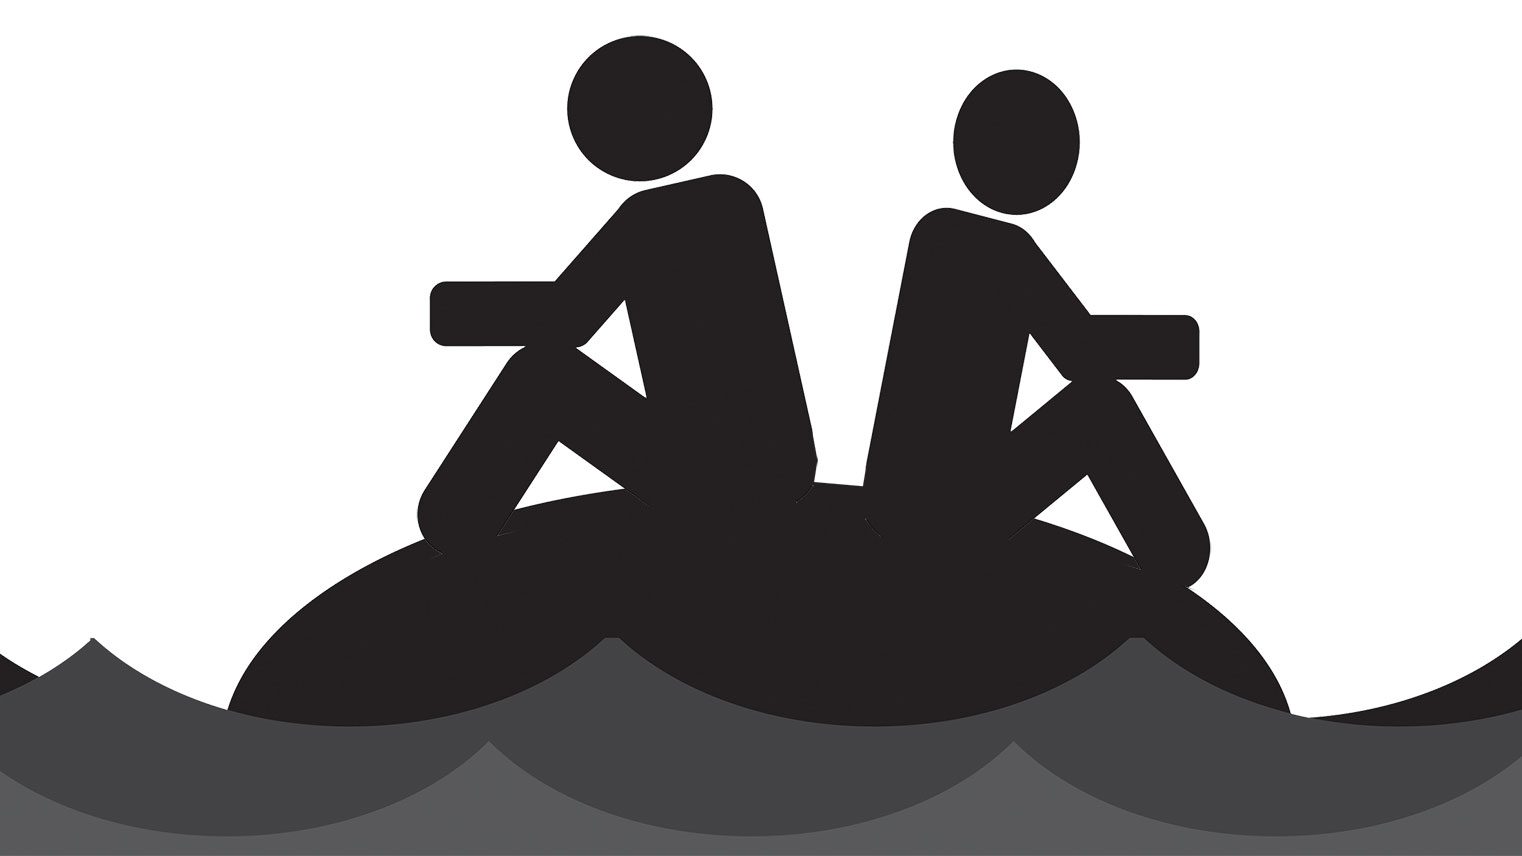 Graphic of two people stranded on an island